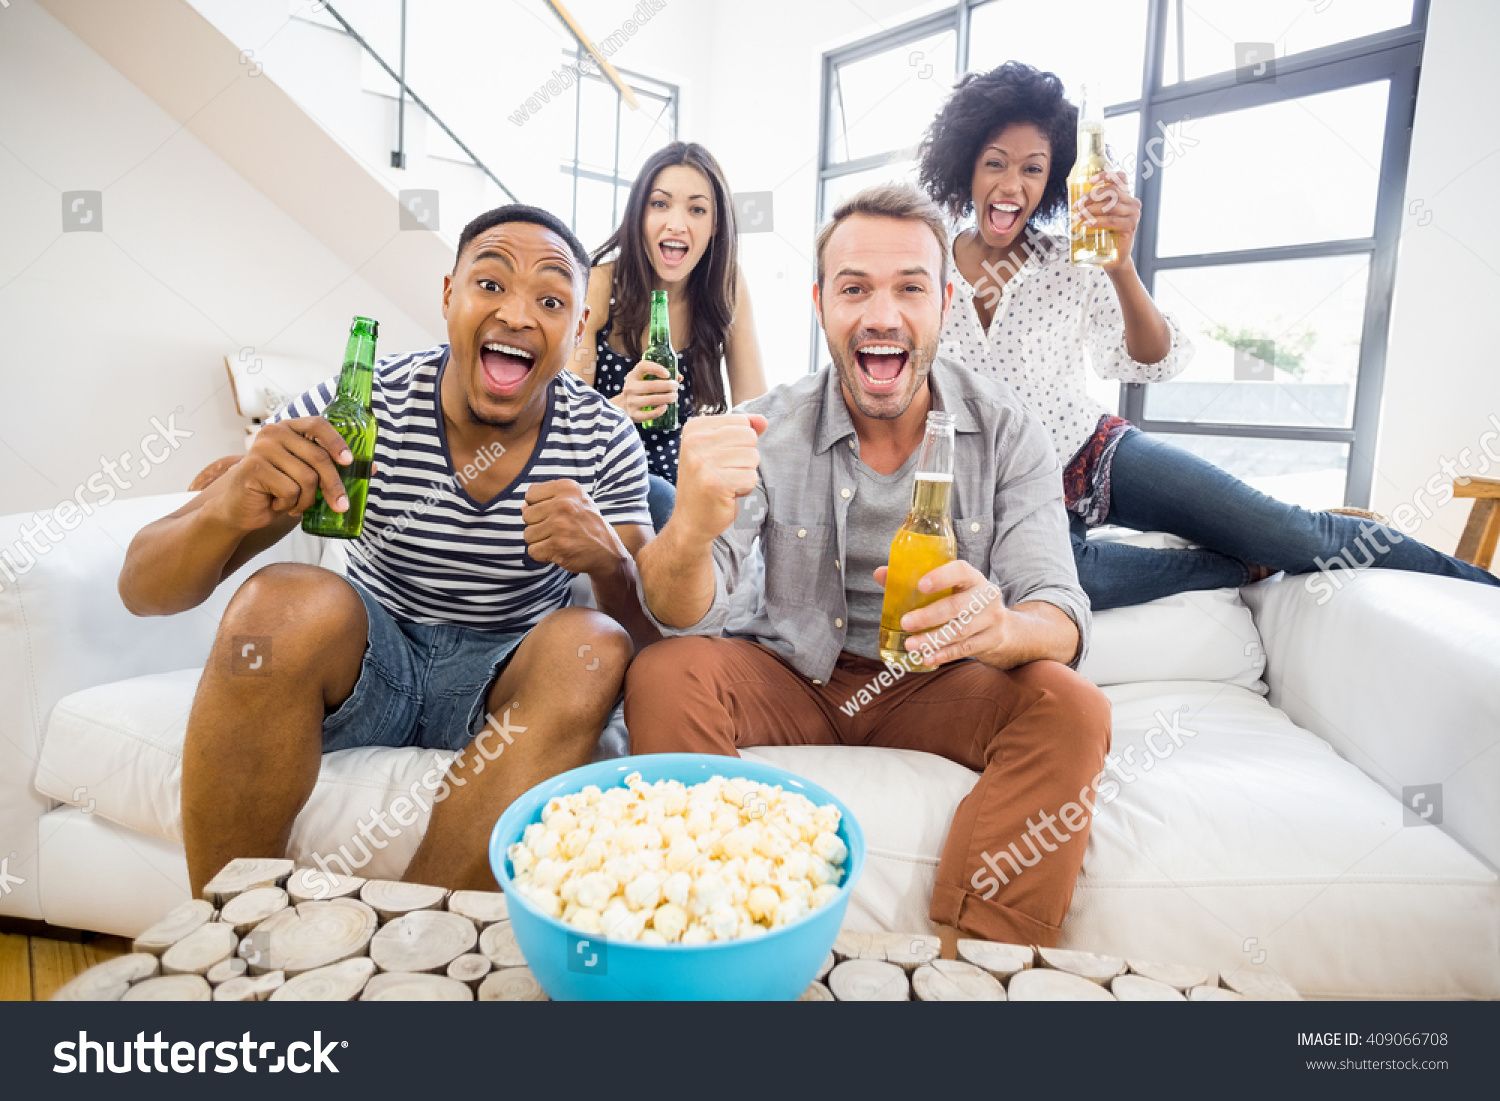 Friends Sitting On Sofa Holding Beer Stock Photo 409066708 - Shutterstock